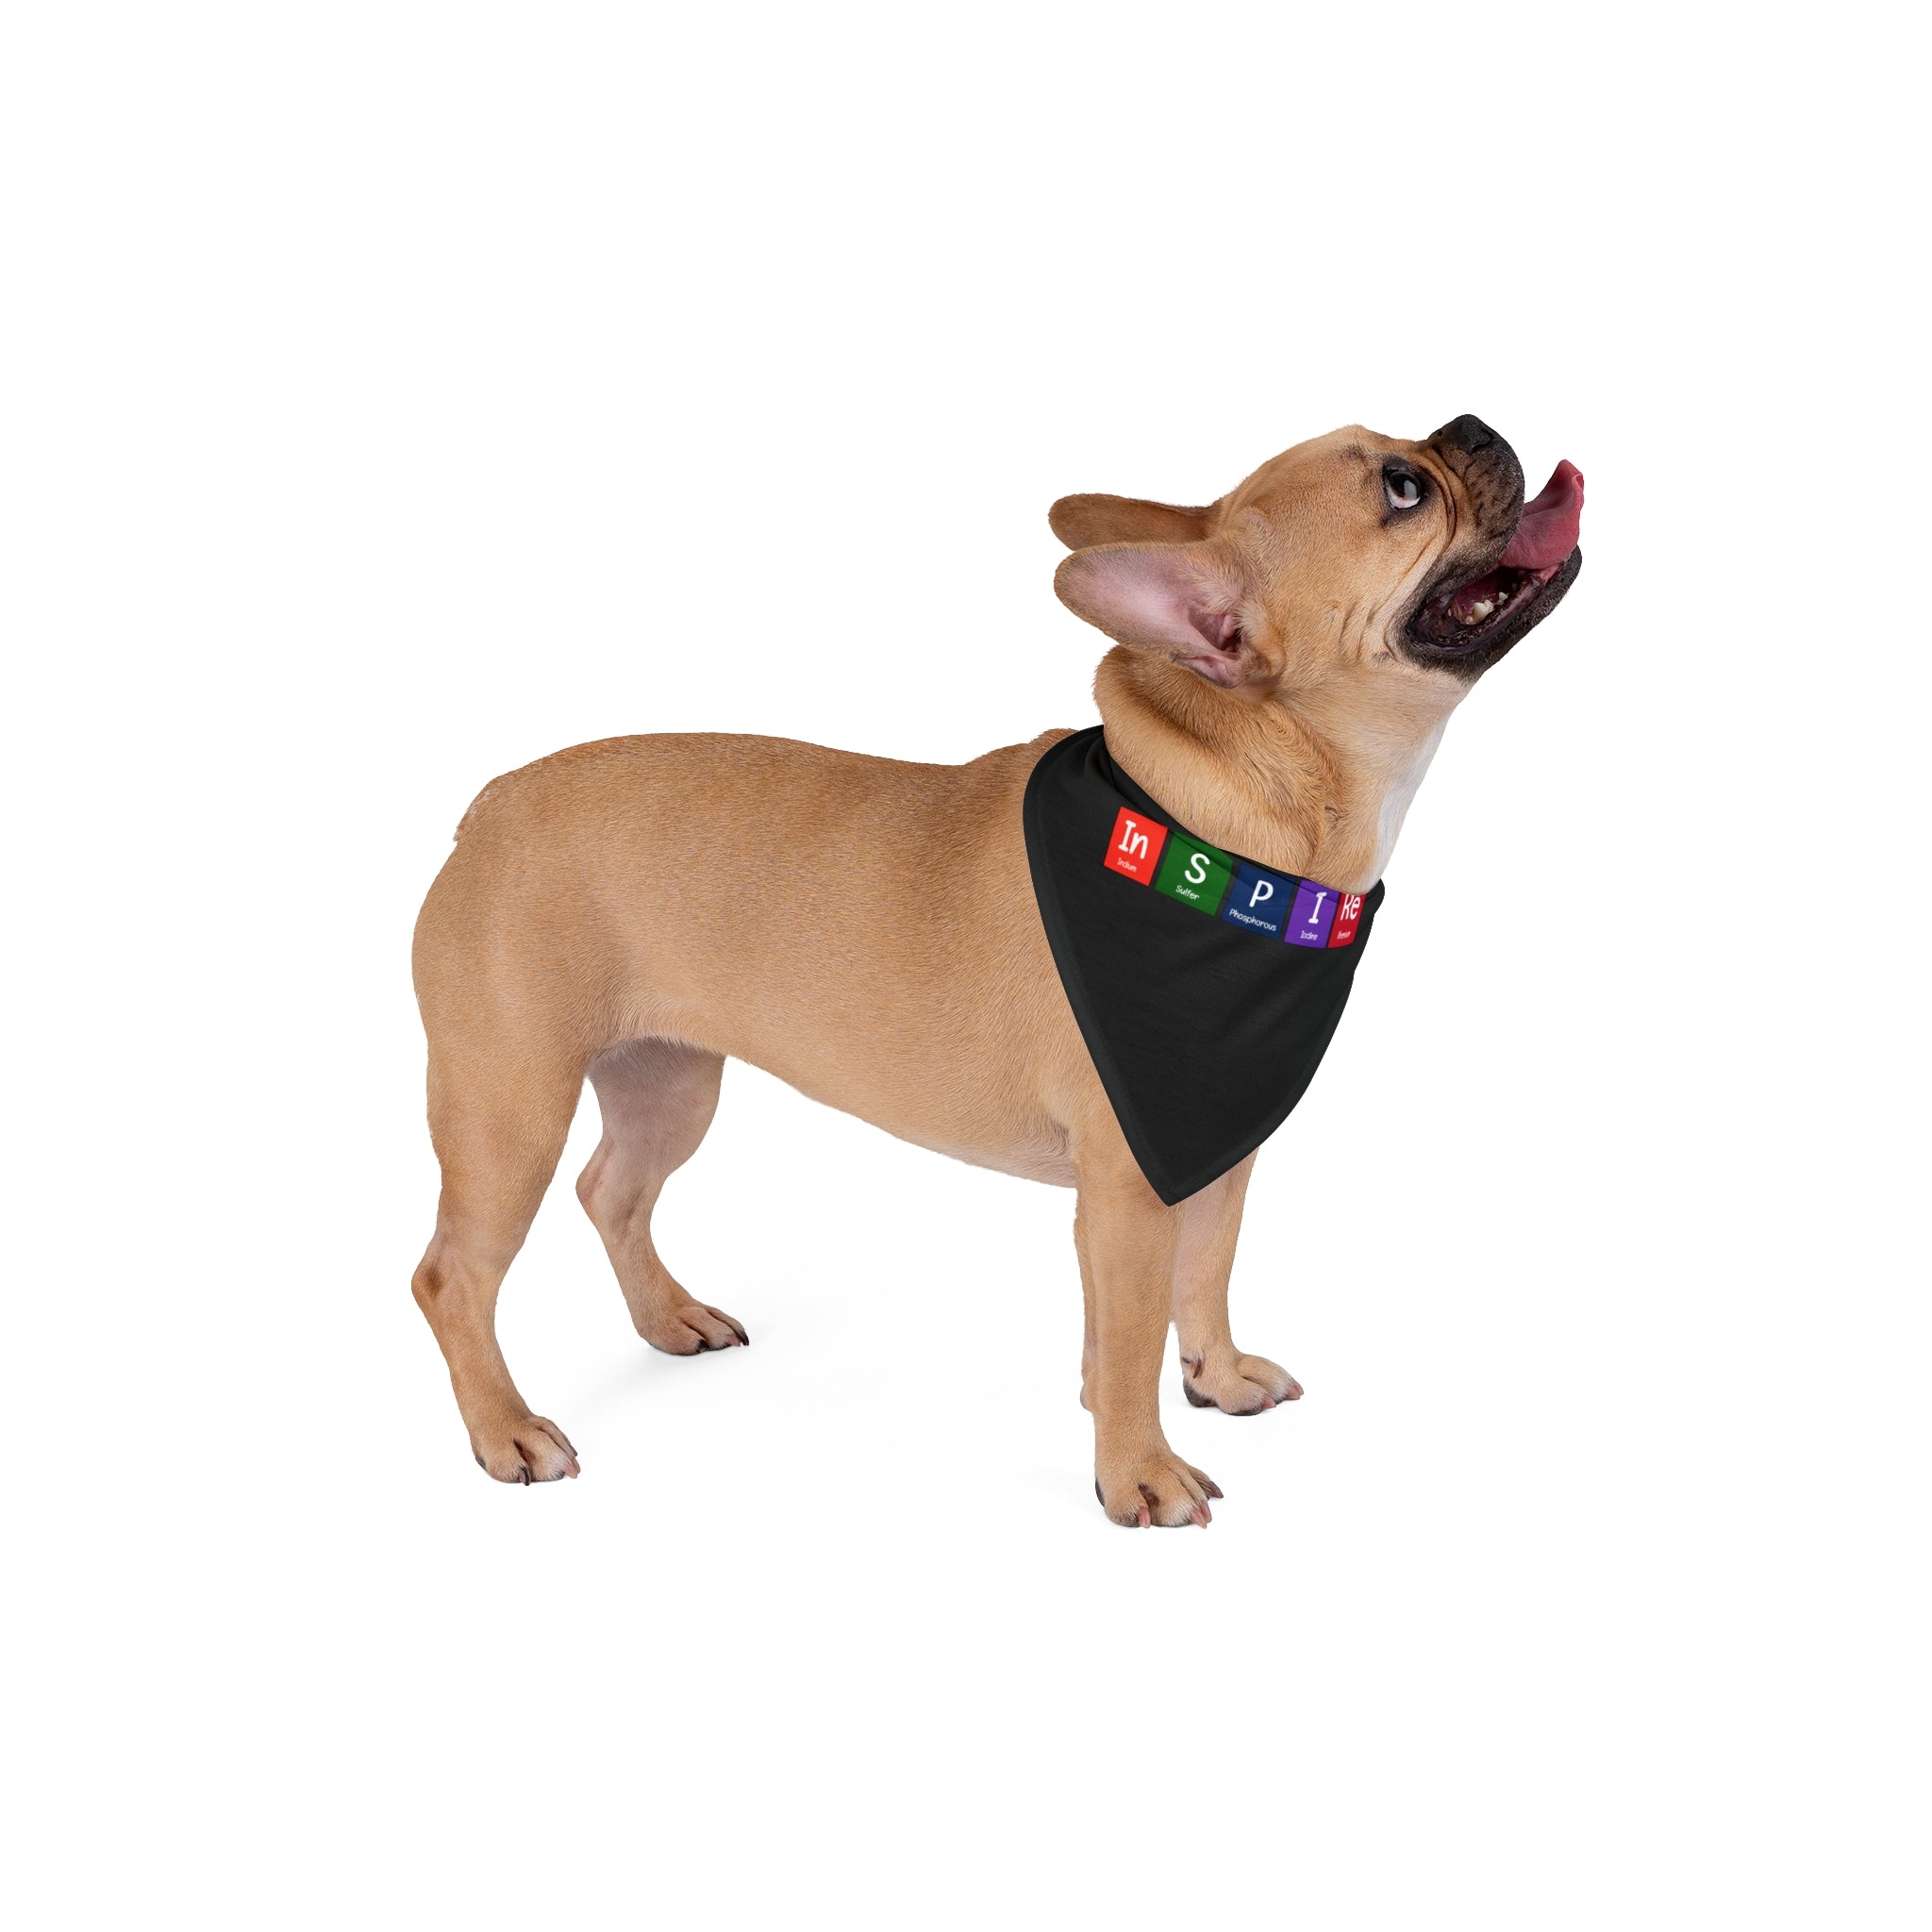 A light brown French Bulldog wearing an In-S-P-I-Re - Pet Bandana with colorful letters looks up with its mouth open, isolated on a white background.